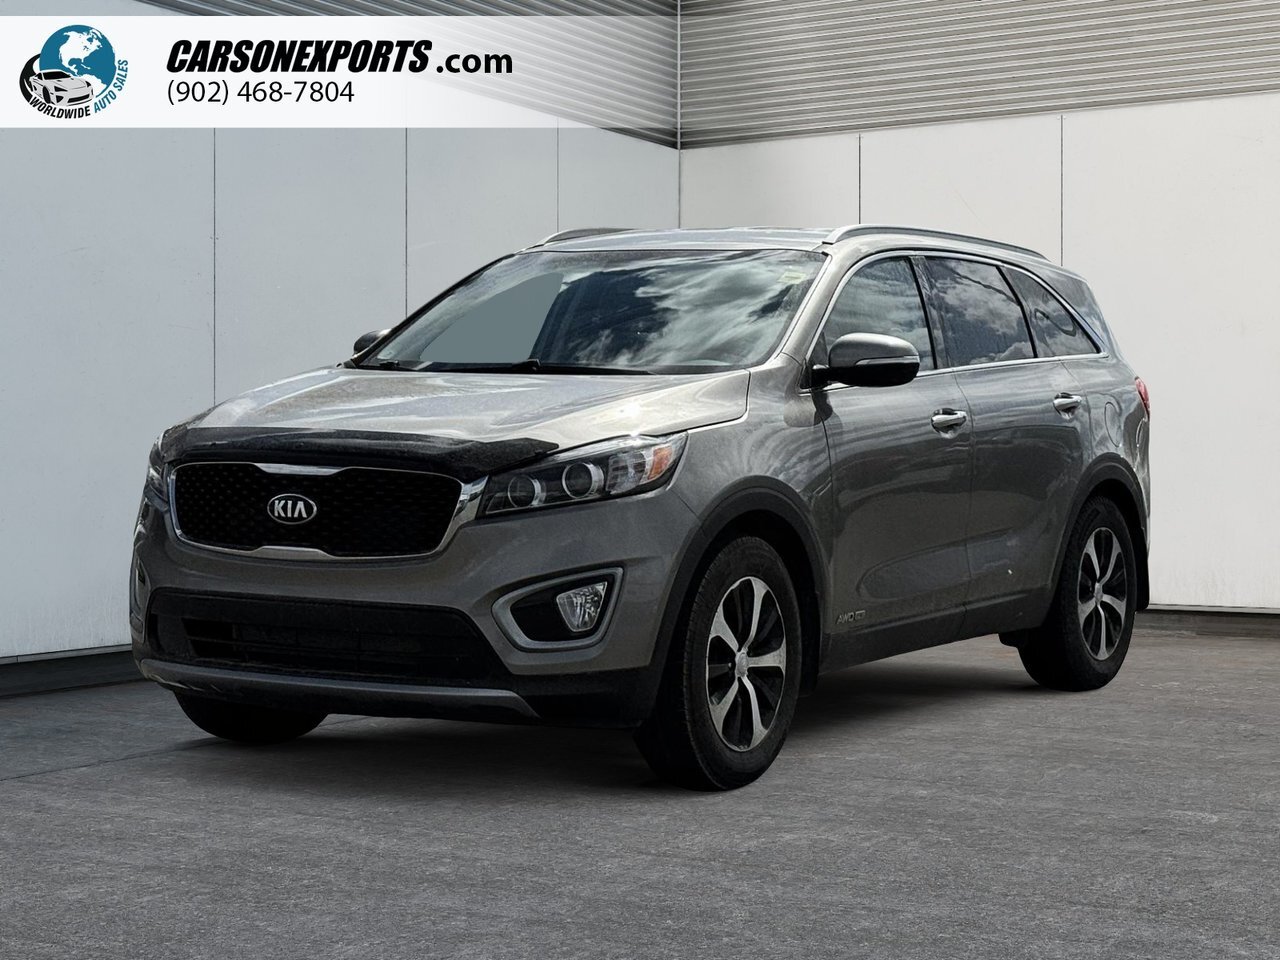 2018 Kia Sorento EX The best place to buy a used car. Period.